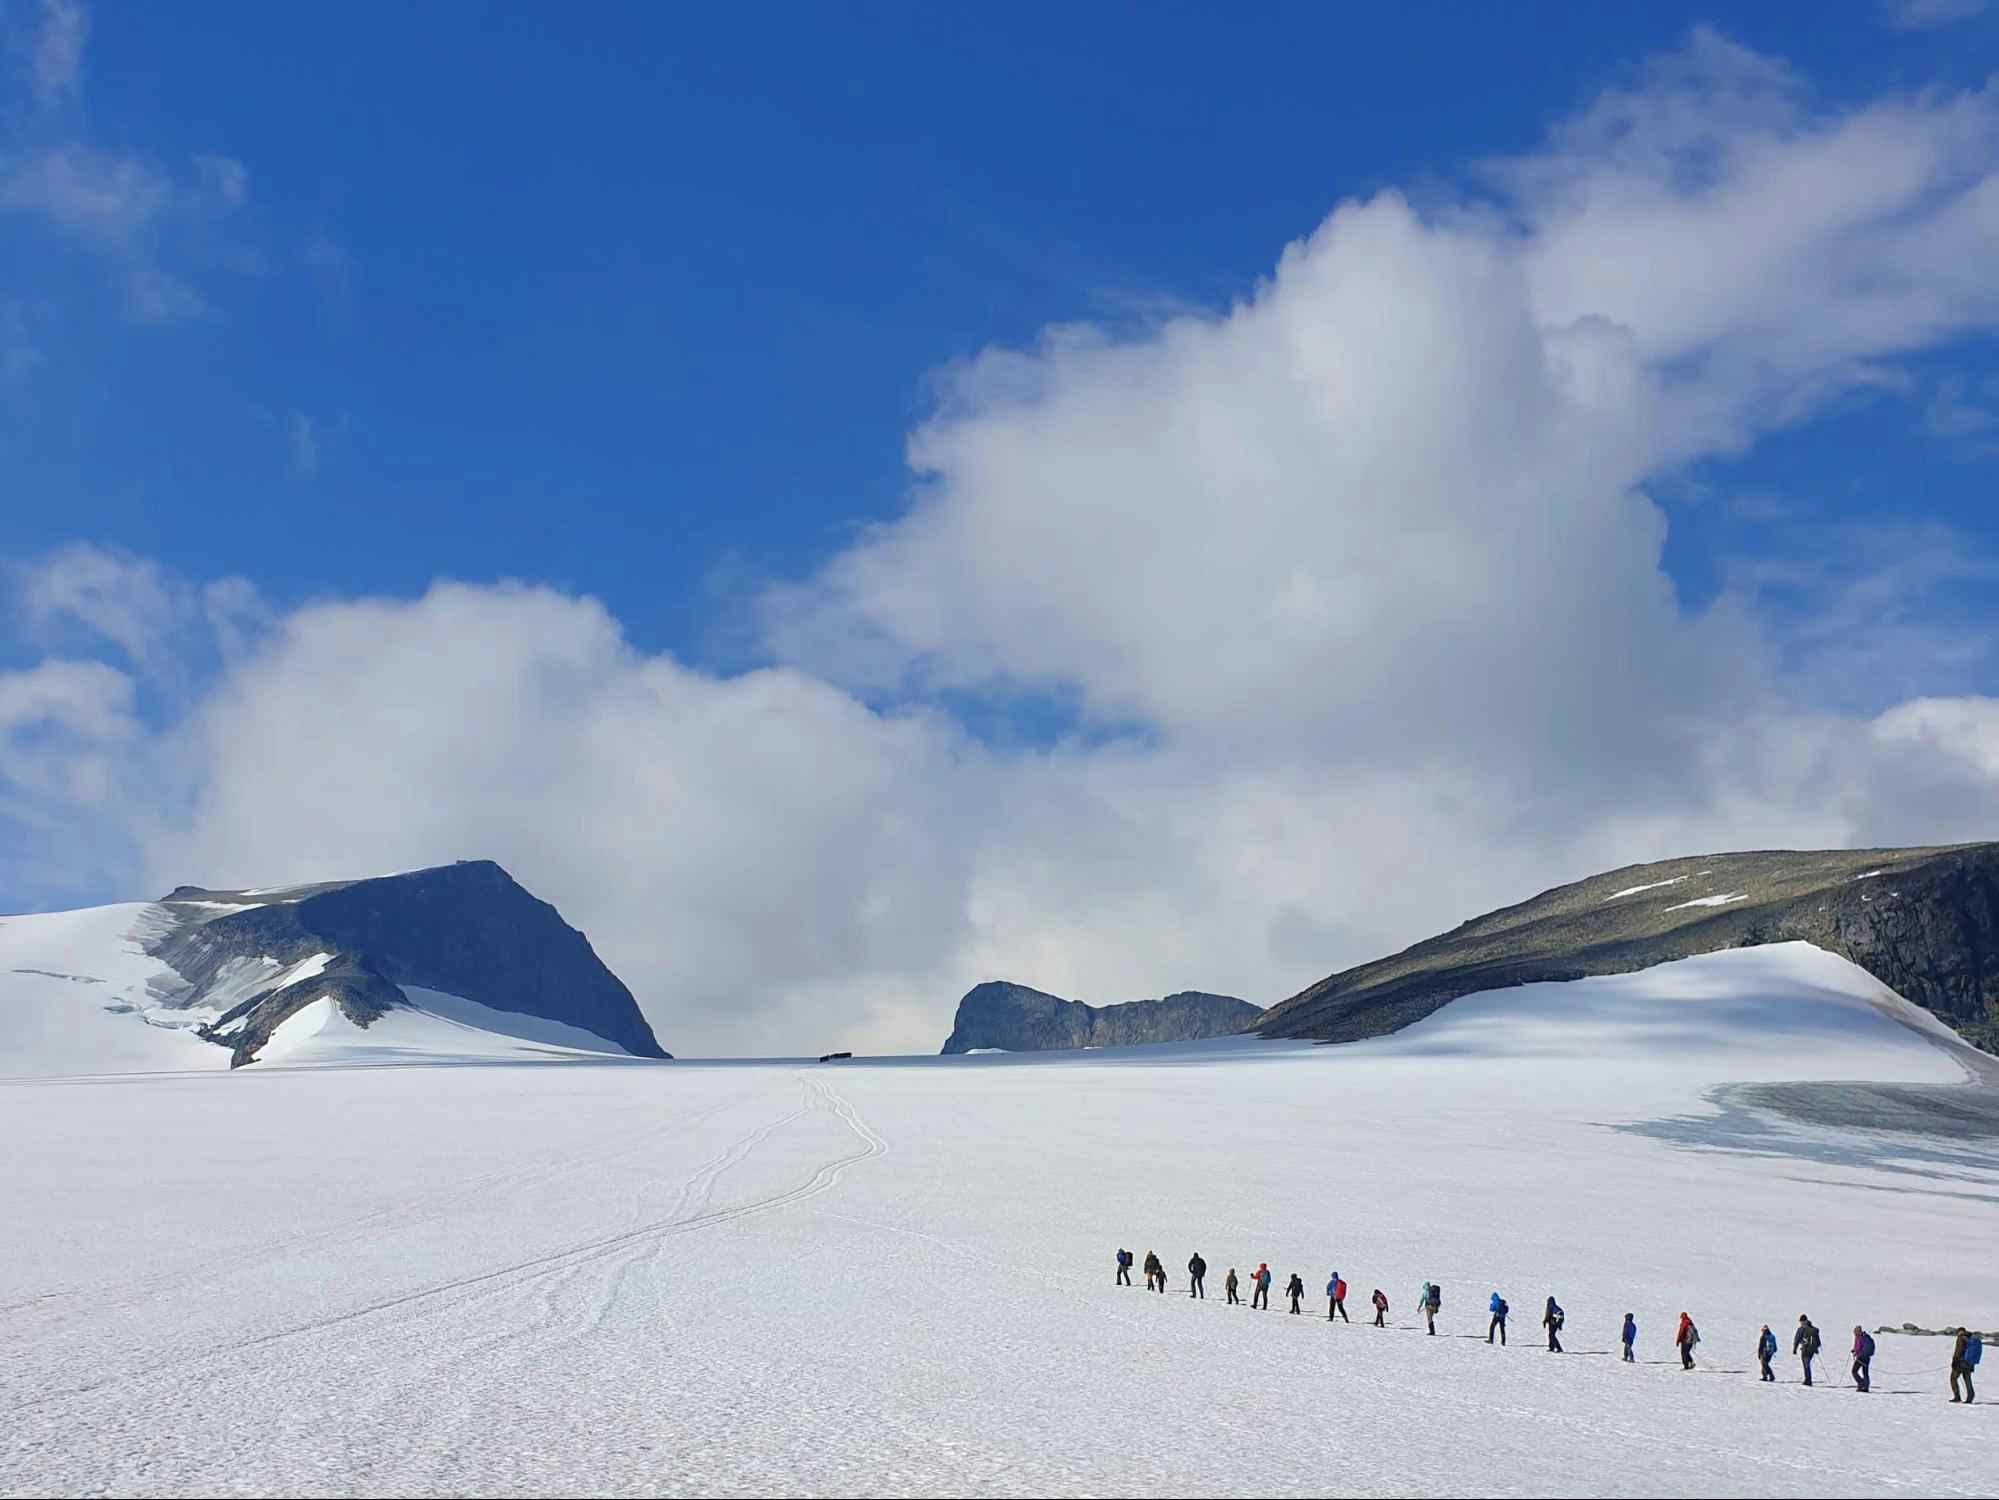 A group of hikers roped together on the snowy slops of Galdhøpiggen, the highest mountain in Norway. 